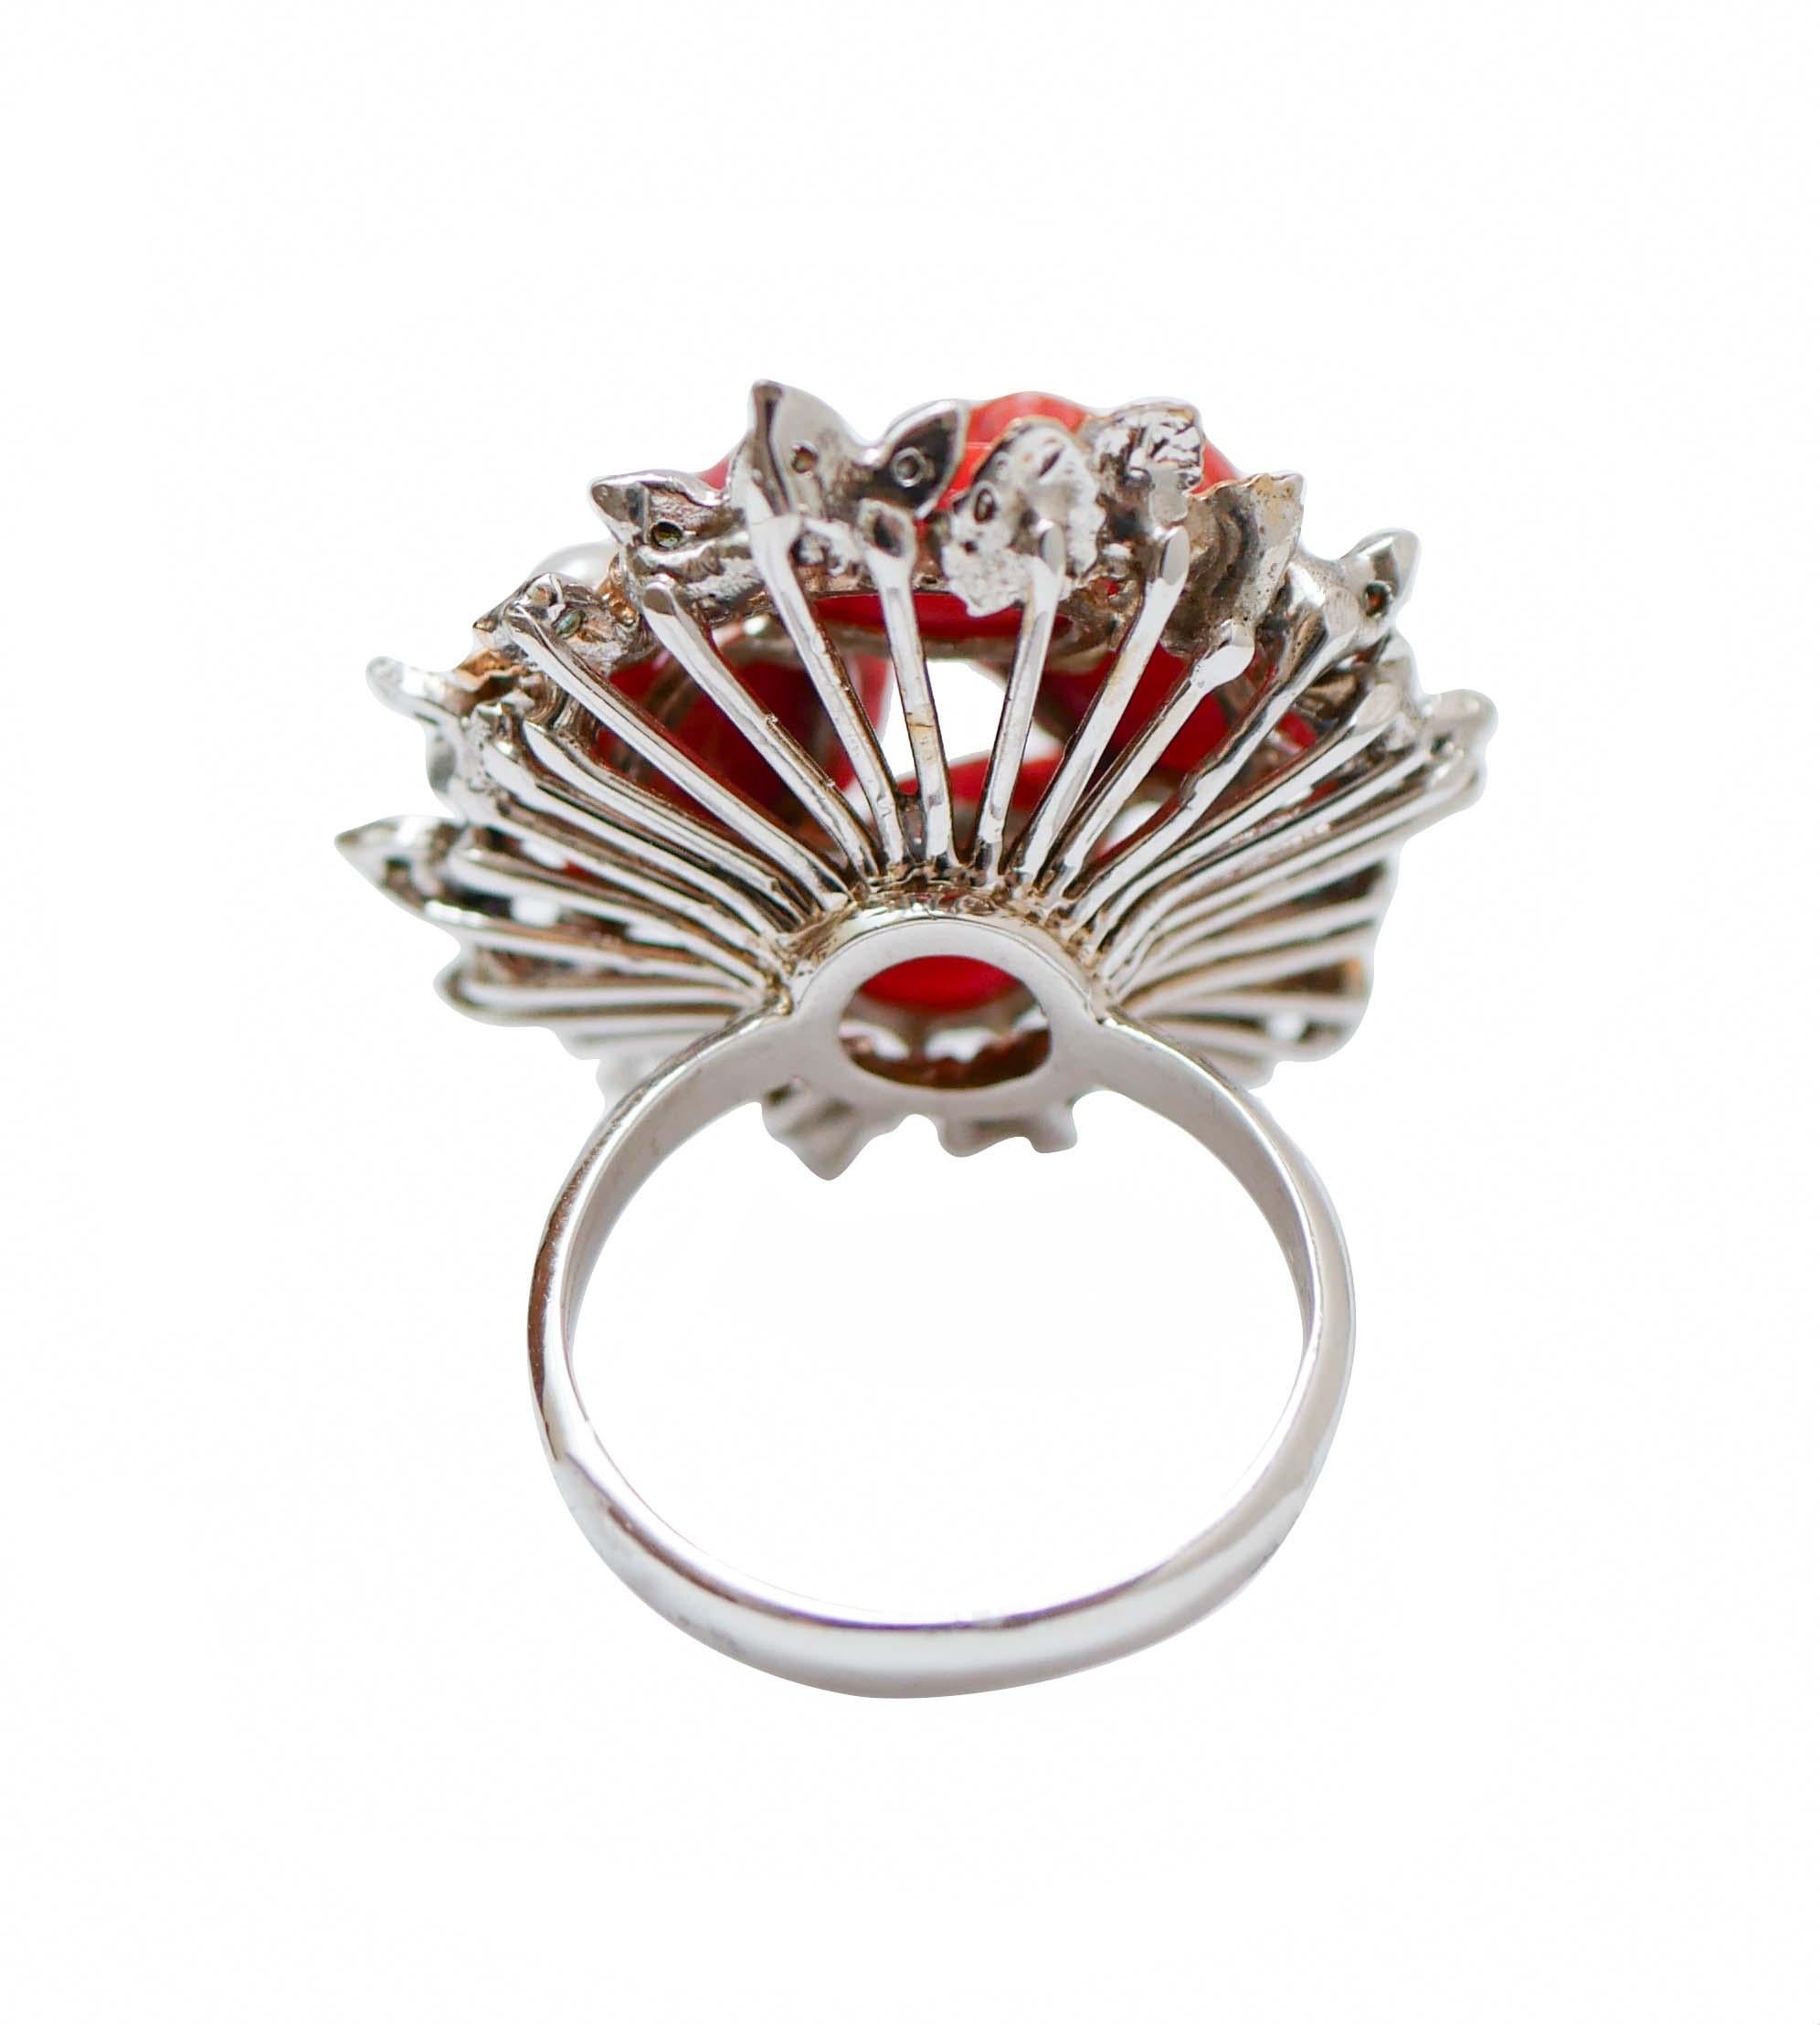 Retro Coral, Fancy Diamonds, Pearls, 14 Karat White Gold and Rose Gold Ring.  For Sale